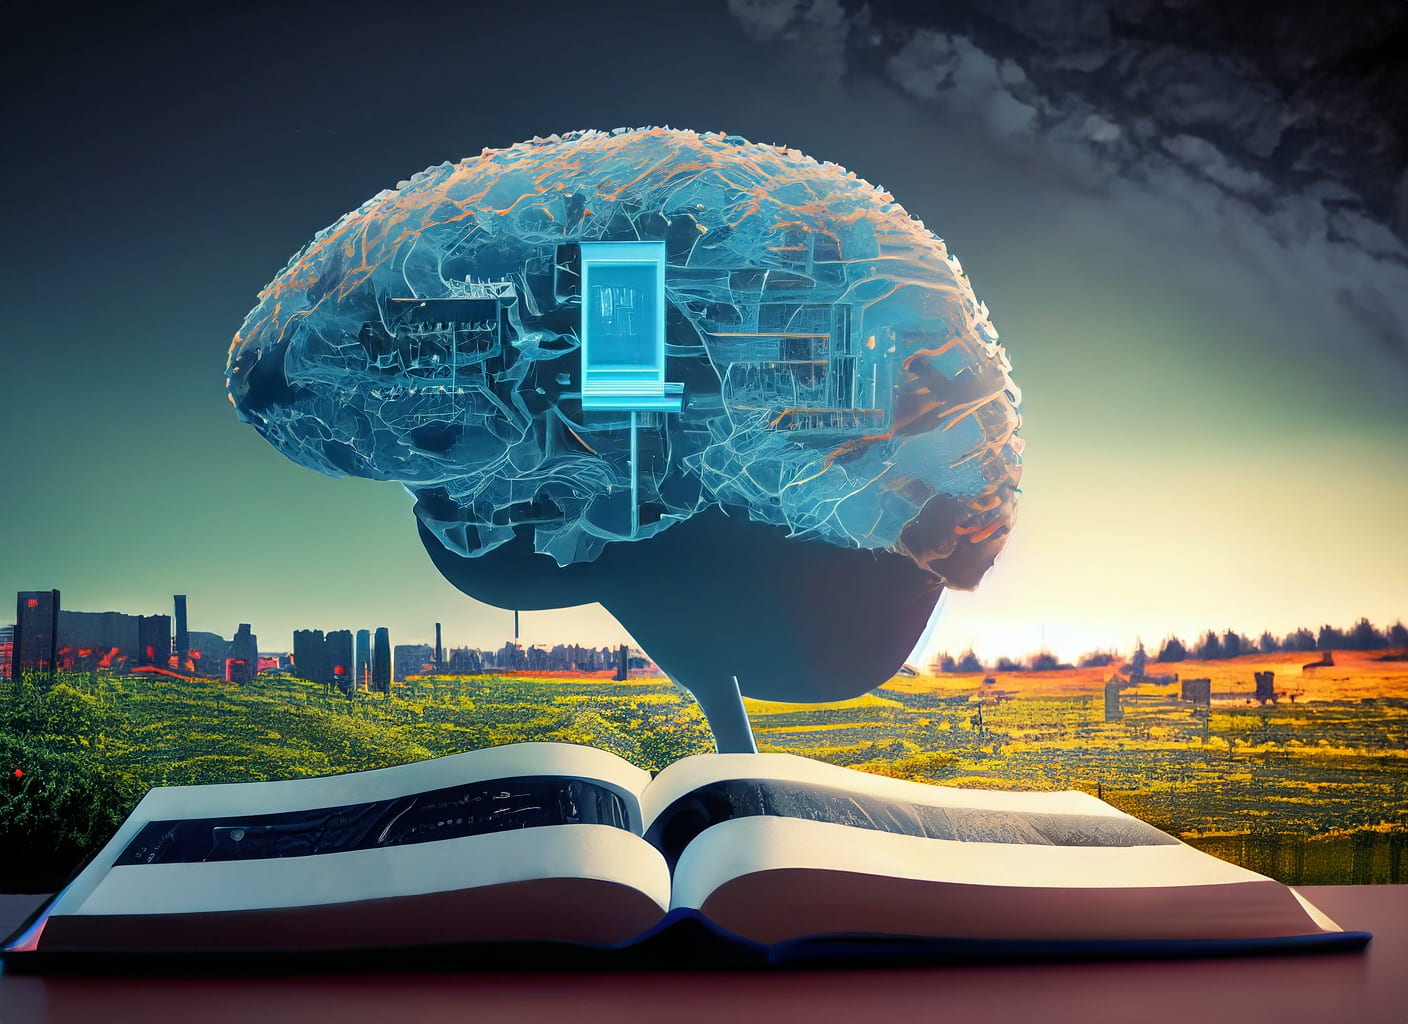 Large brain hovering above an open book, with in a countryside landcape and city landscape with tower blocks in the background.